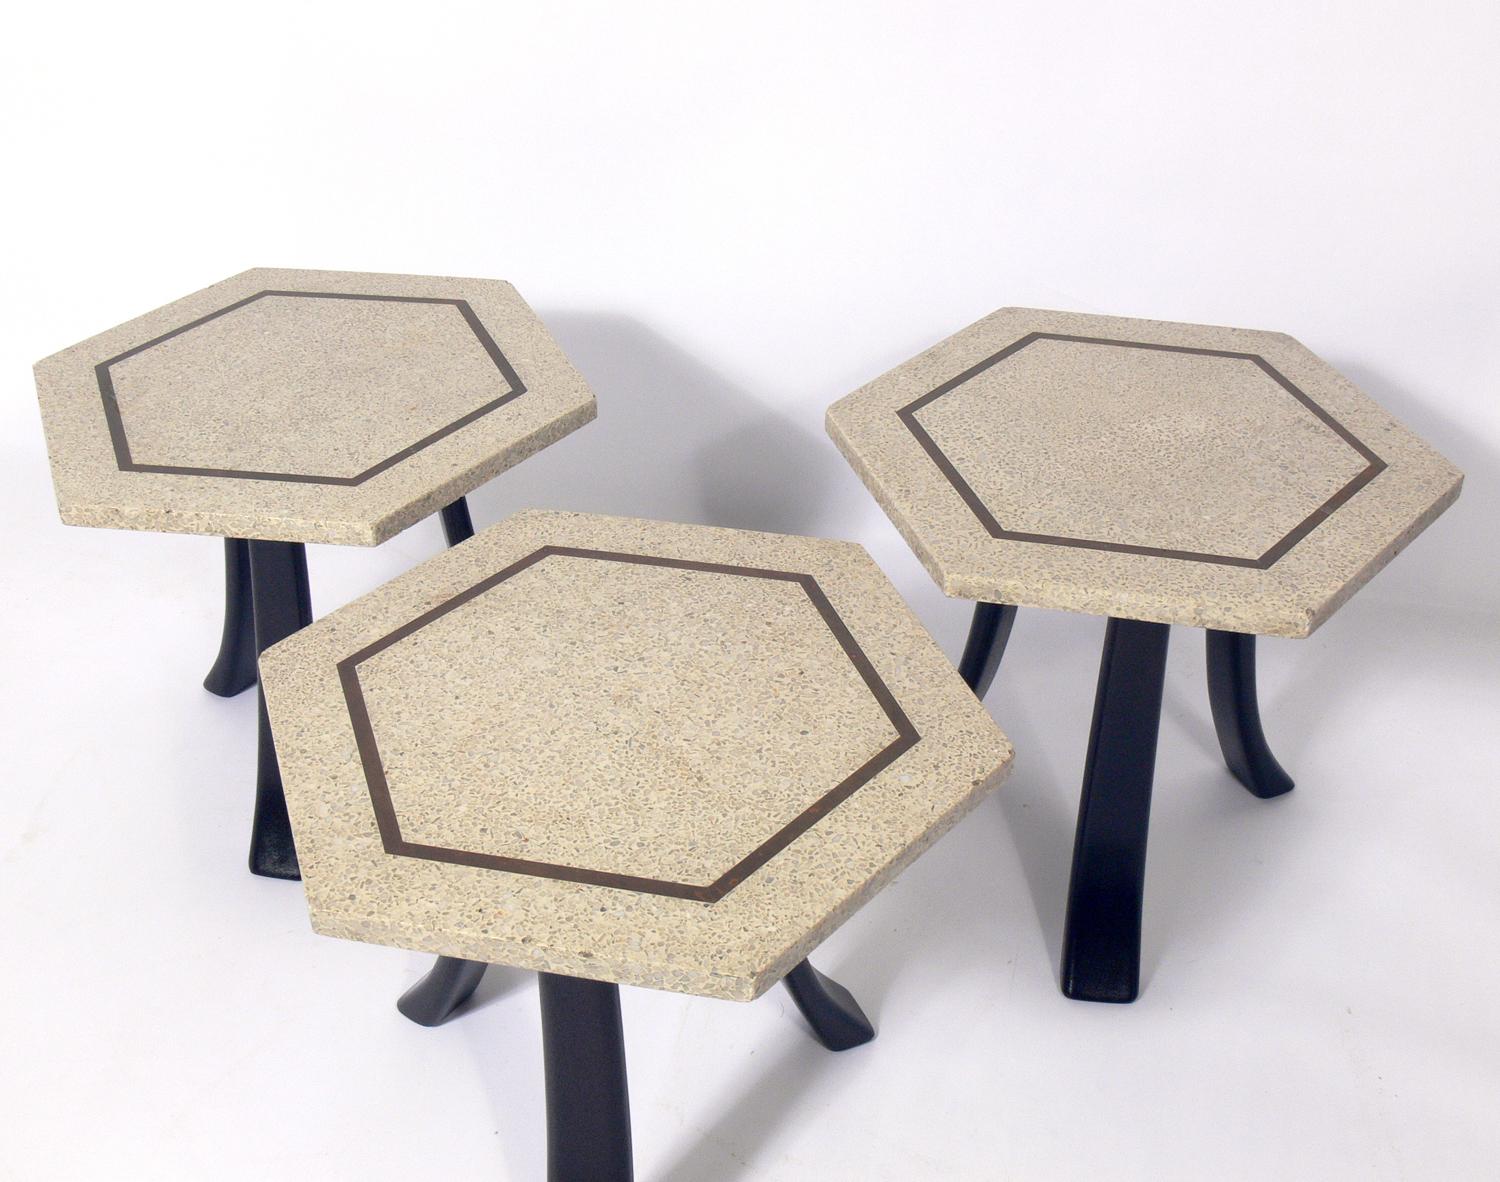 Selection of Harvey Probber hex tables, American, circa 1960s. The wood bases have been refinished in an ultra-deep brown. The tops are constructed of terrazzo inlaid with brass and retain their warm original patina. They are priced at $1500 each,